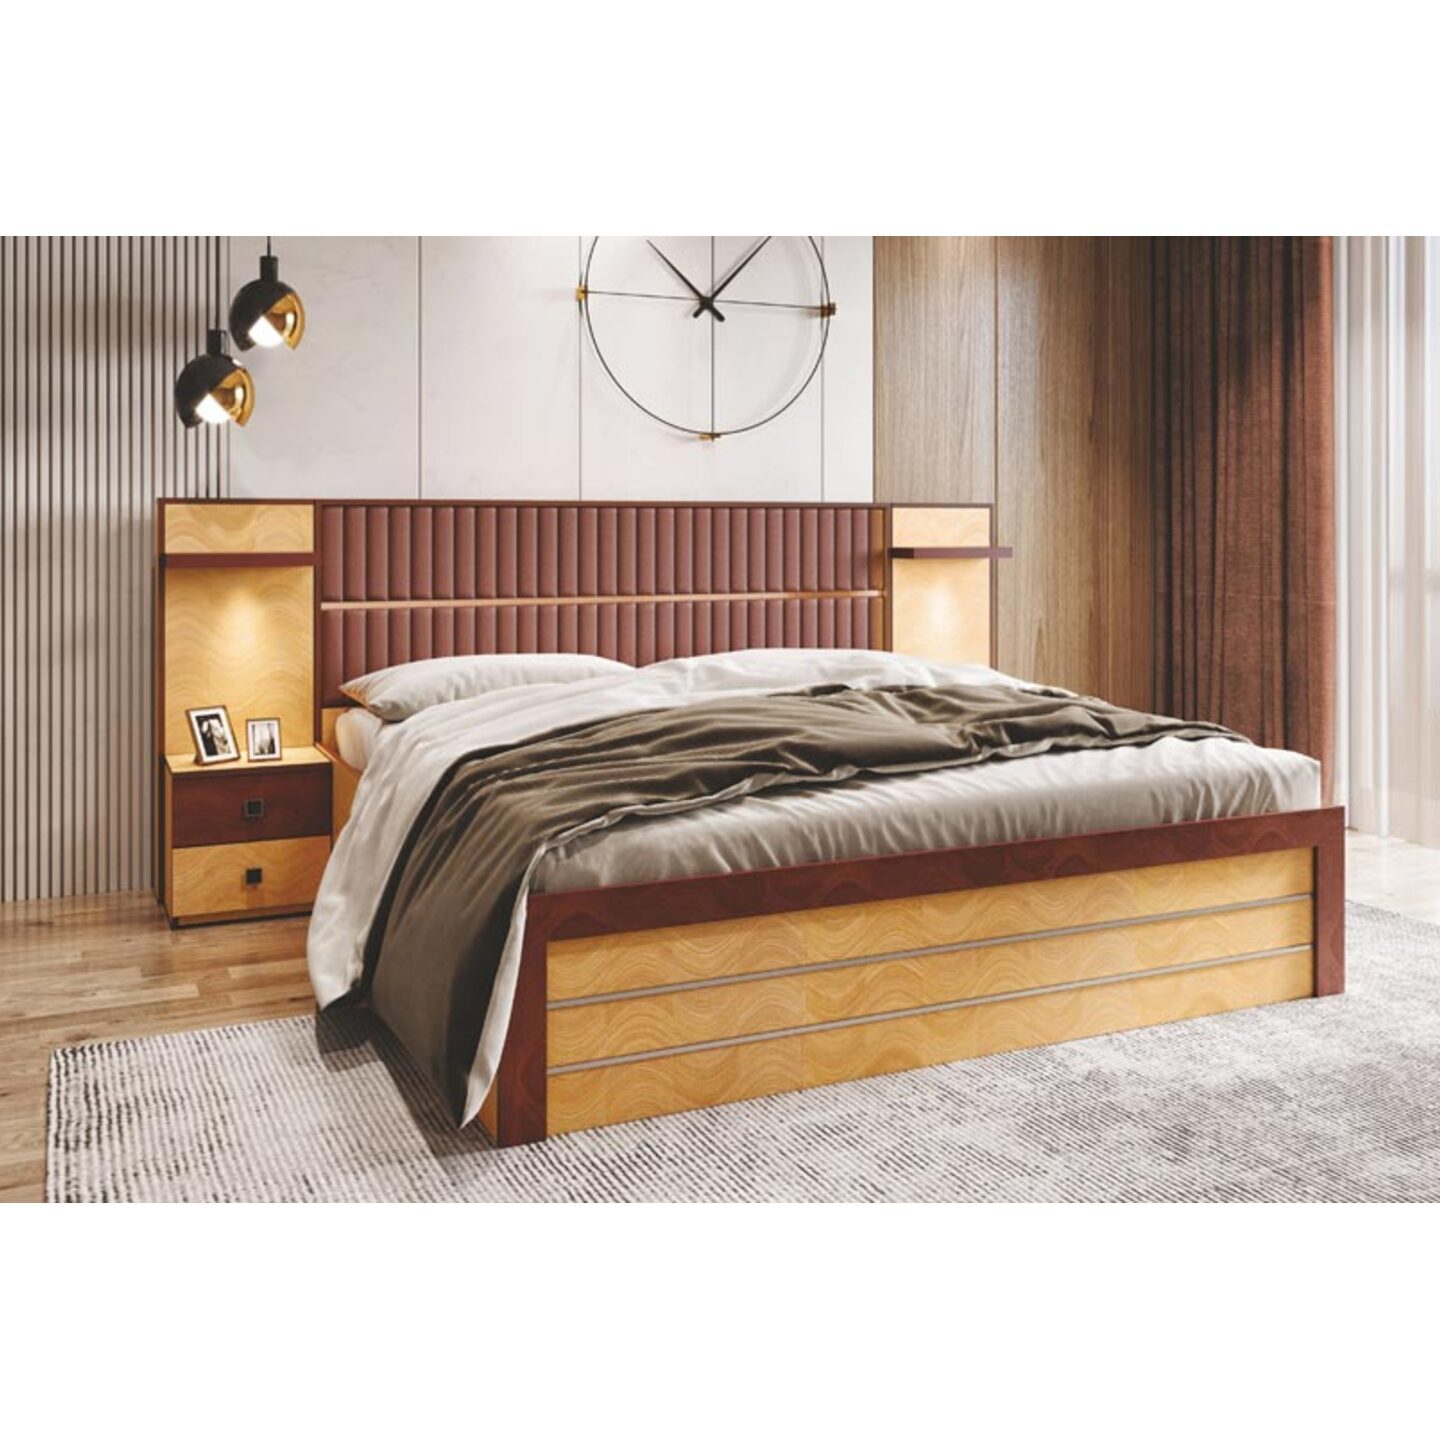 RLF King Size Bed 78"x72" Platium In Brown Colour